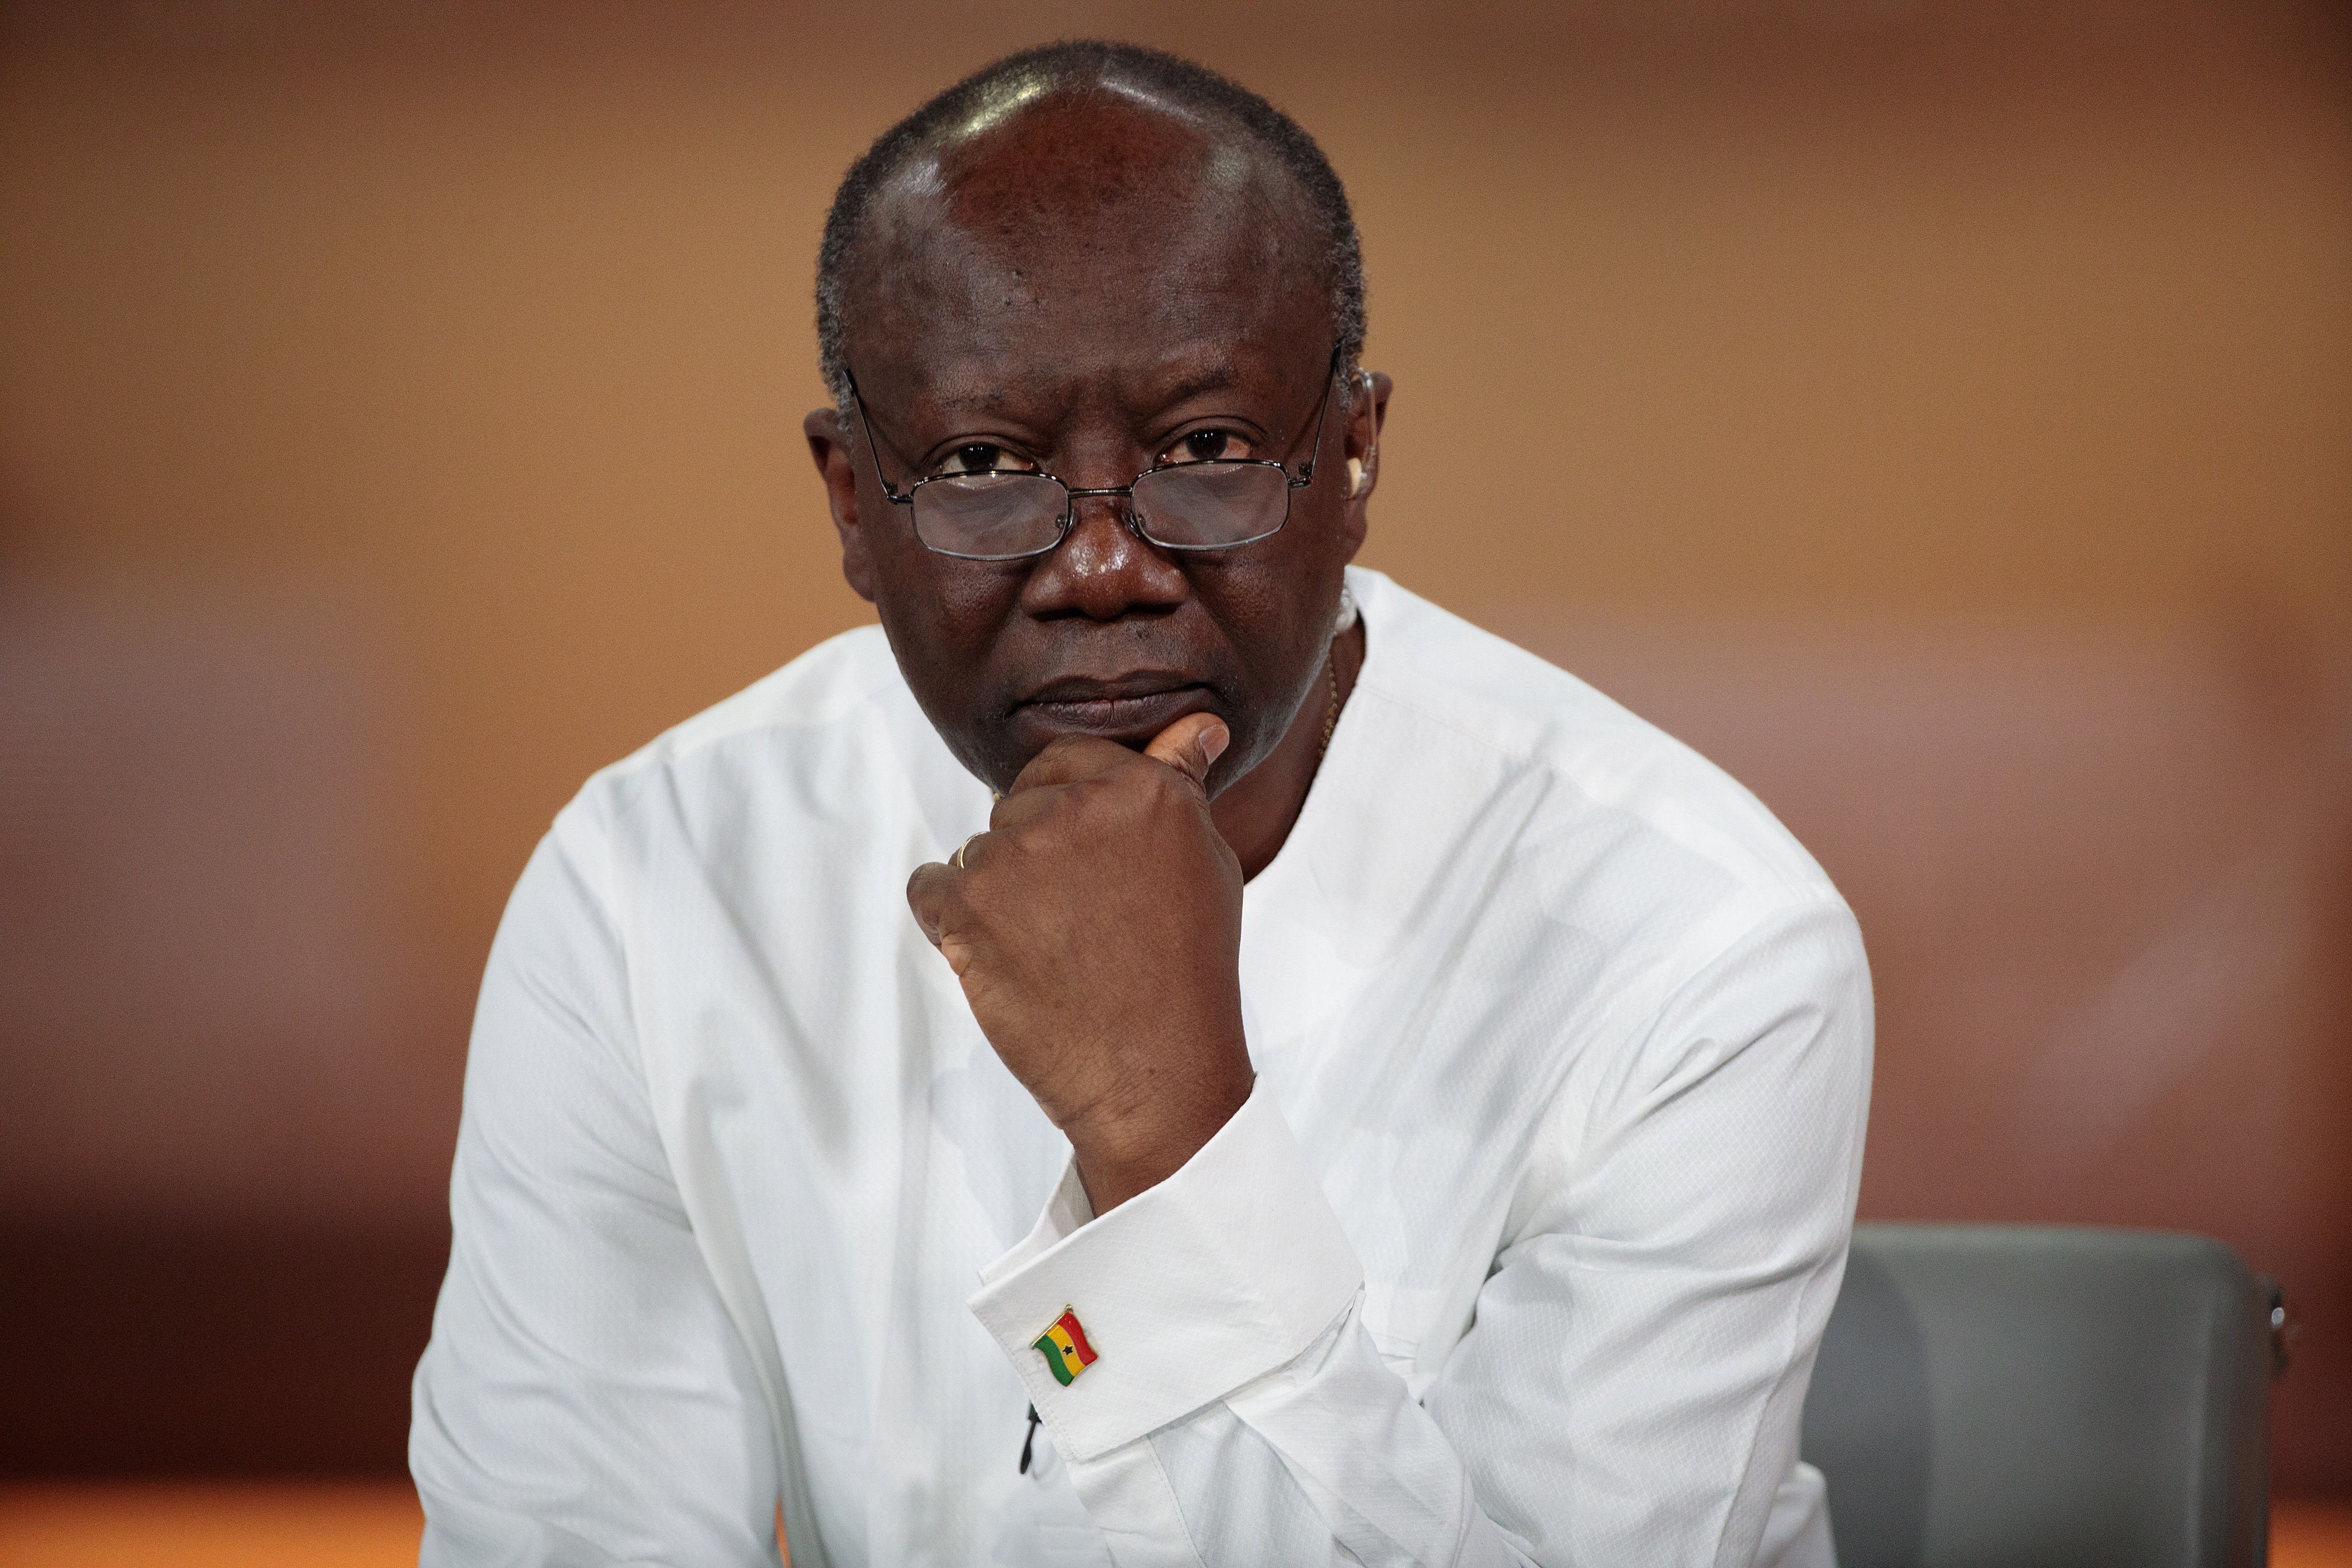 Finance minister Ken Ofori-Atta has said he can move Ghana out of the economic crisis.